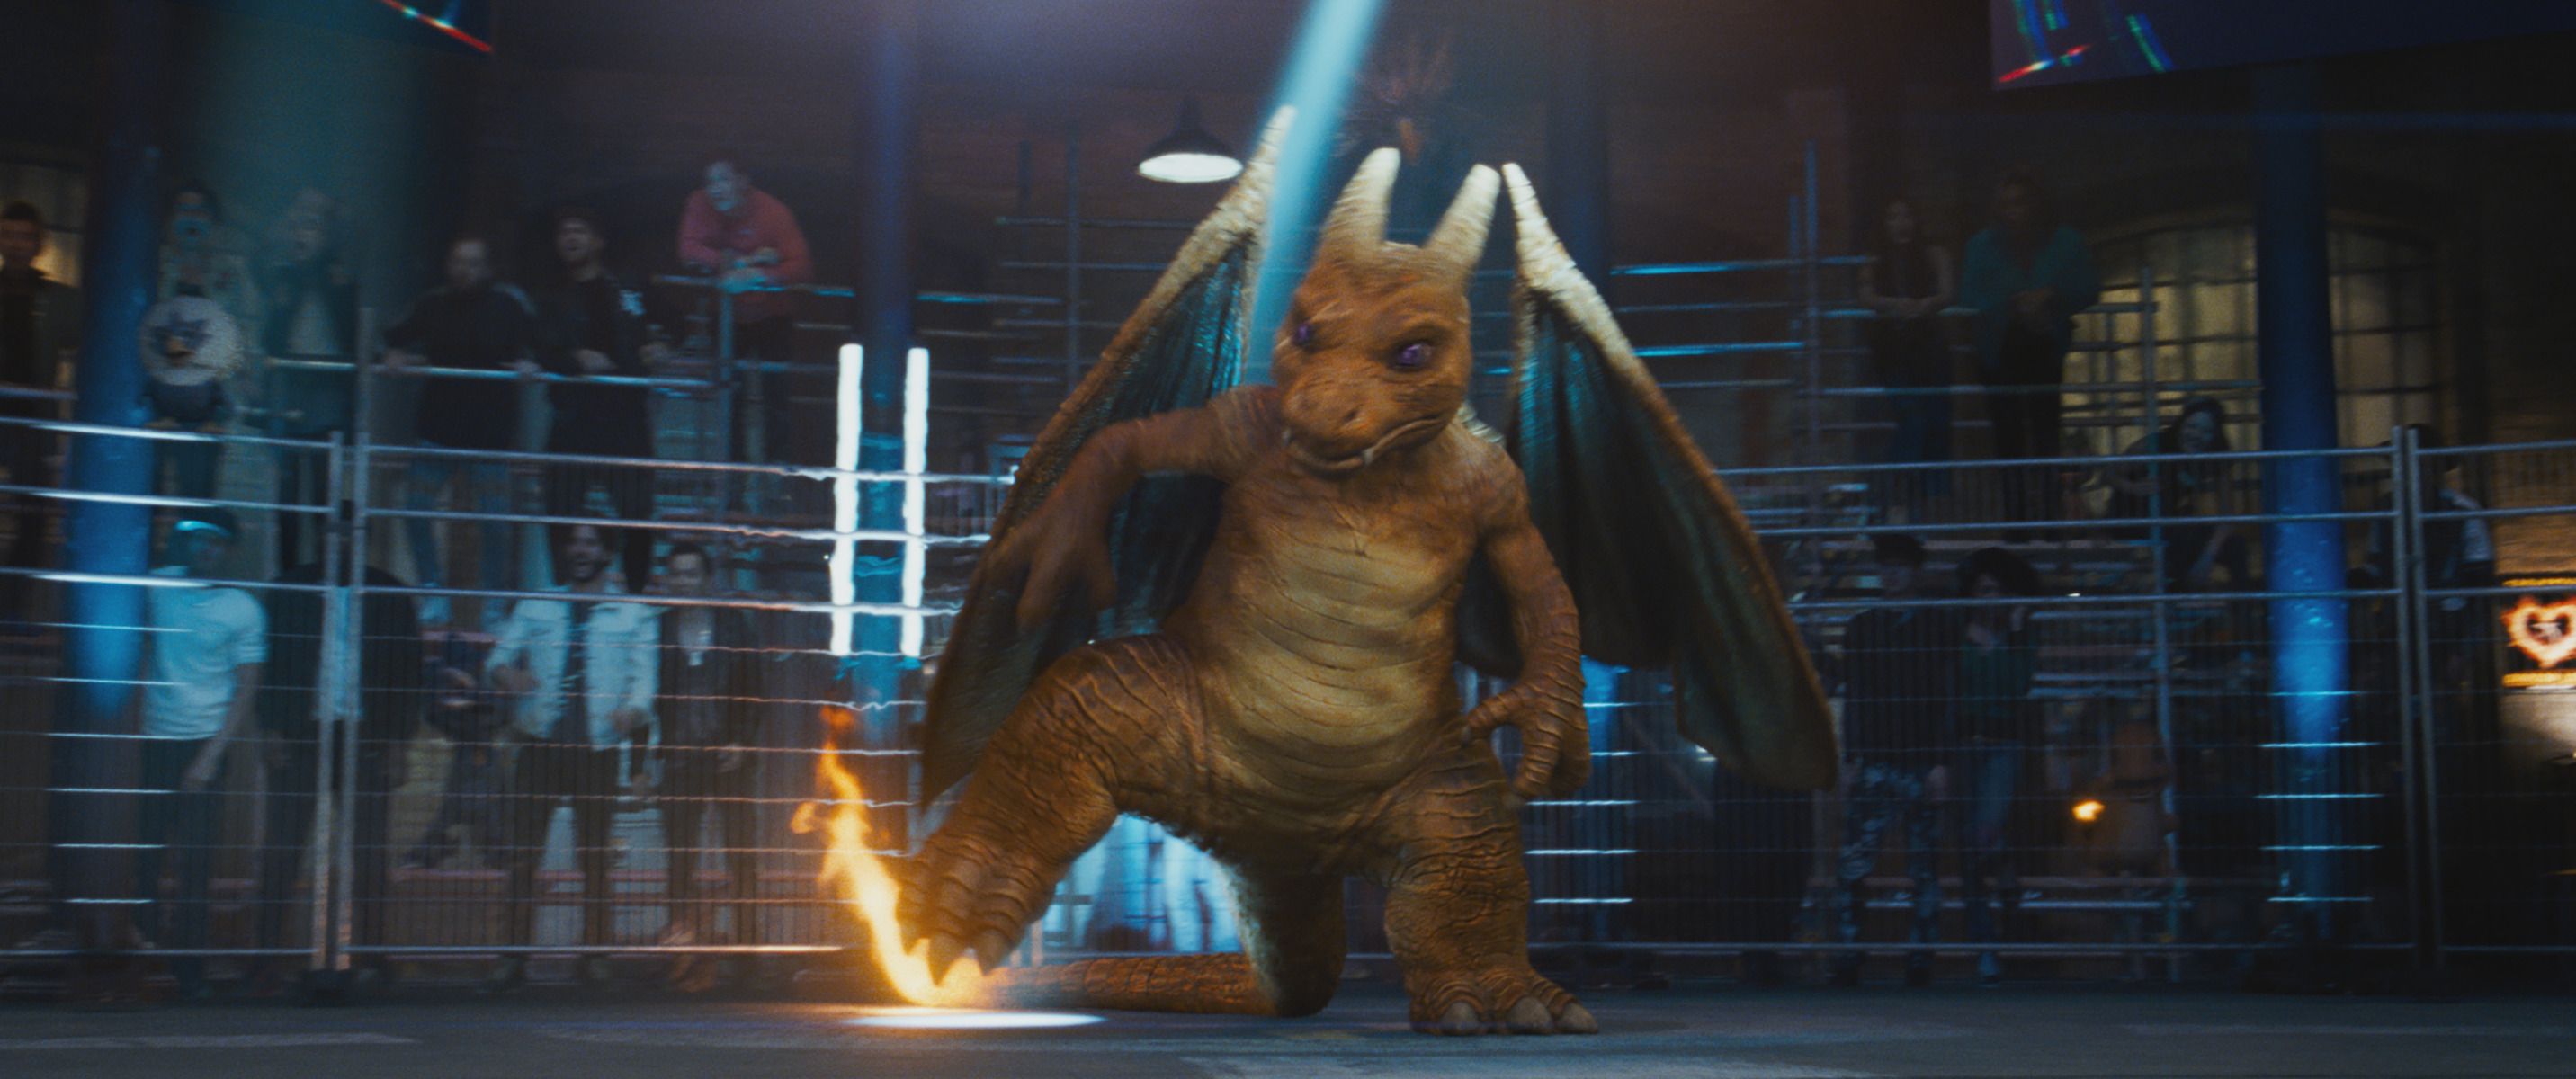 Detective Pikachu Images Feature Loads Of Pokemon Collider